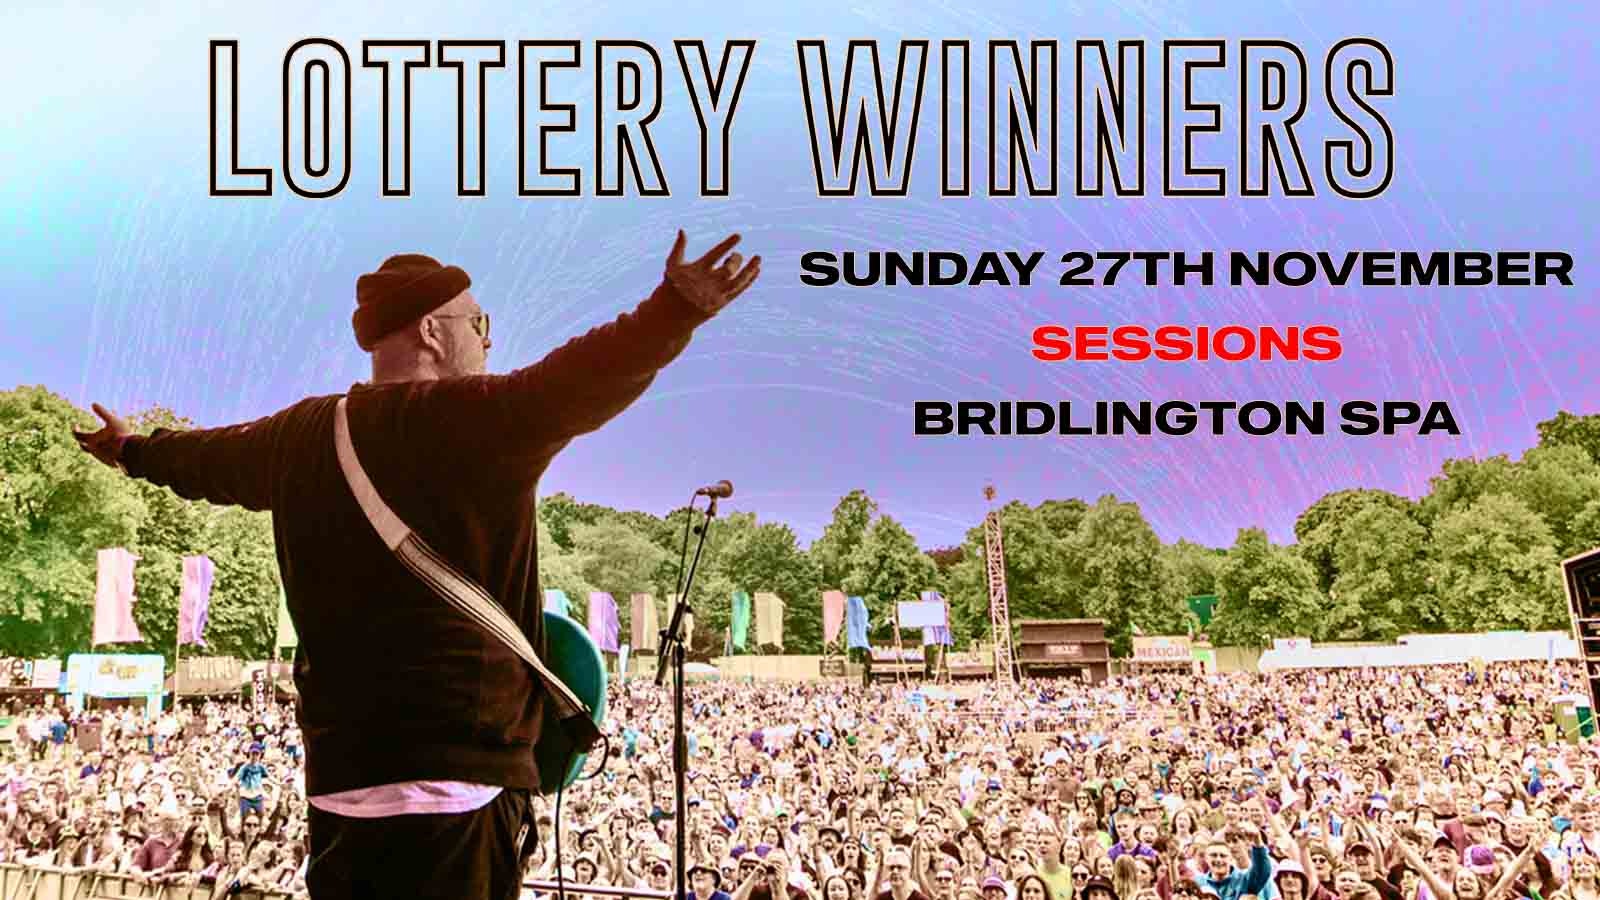 Lottery Winners at Bridlington Spa Sessions